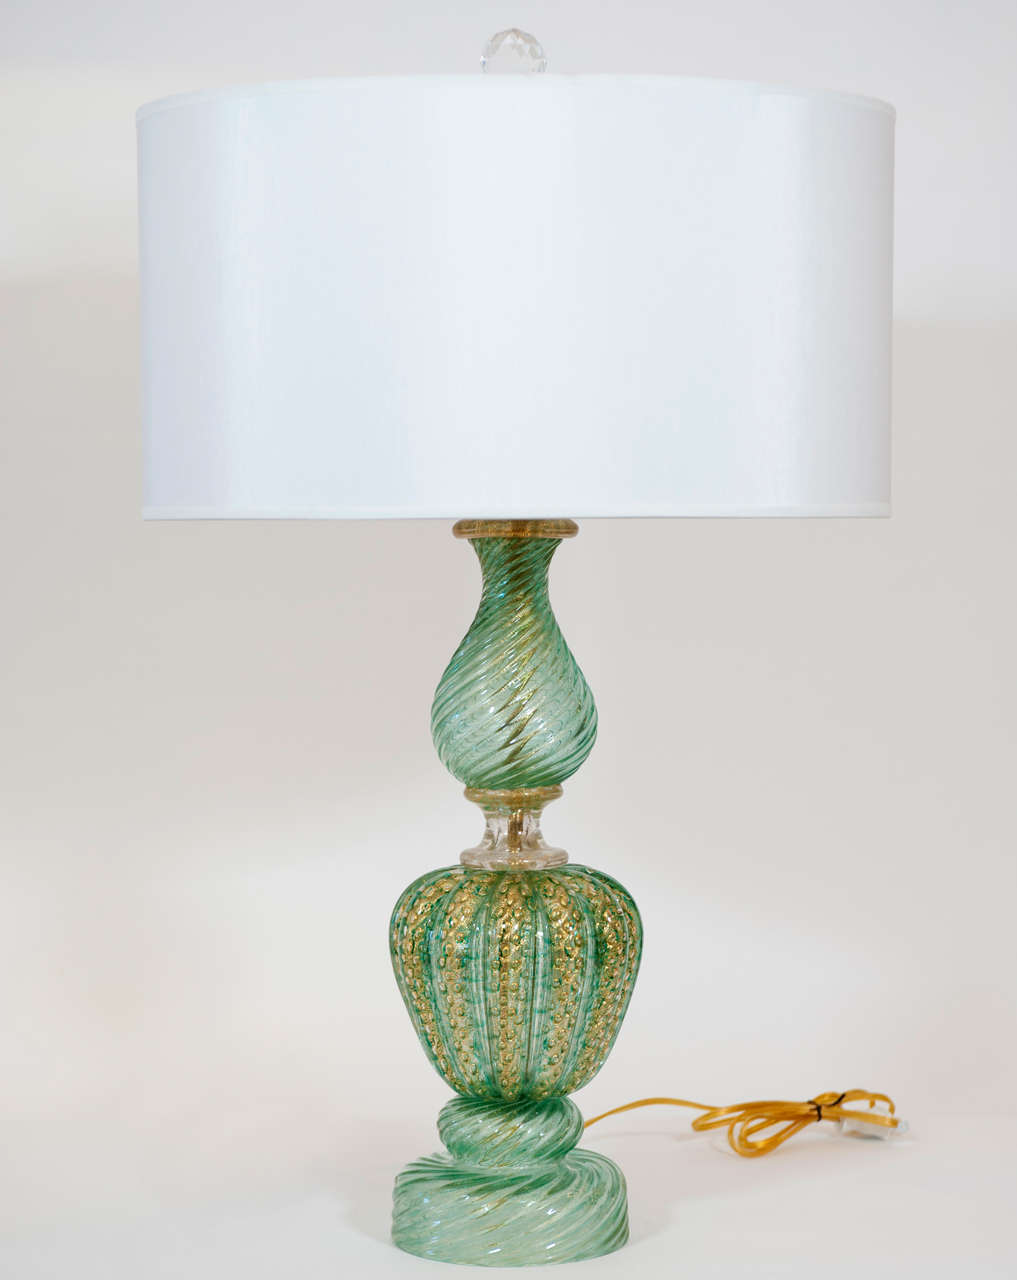 A  magnificent  and beautifully designed
vintage Murano lamp by Barovier. Great
colour!